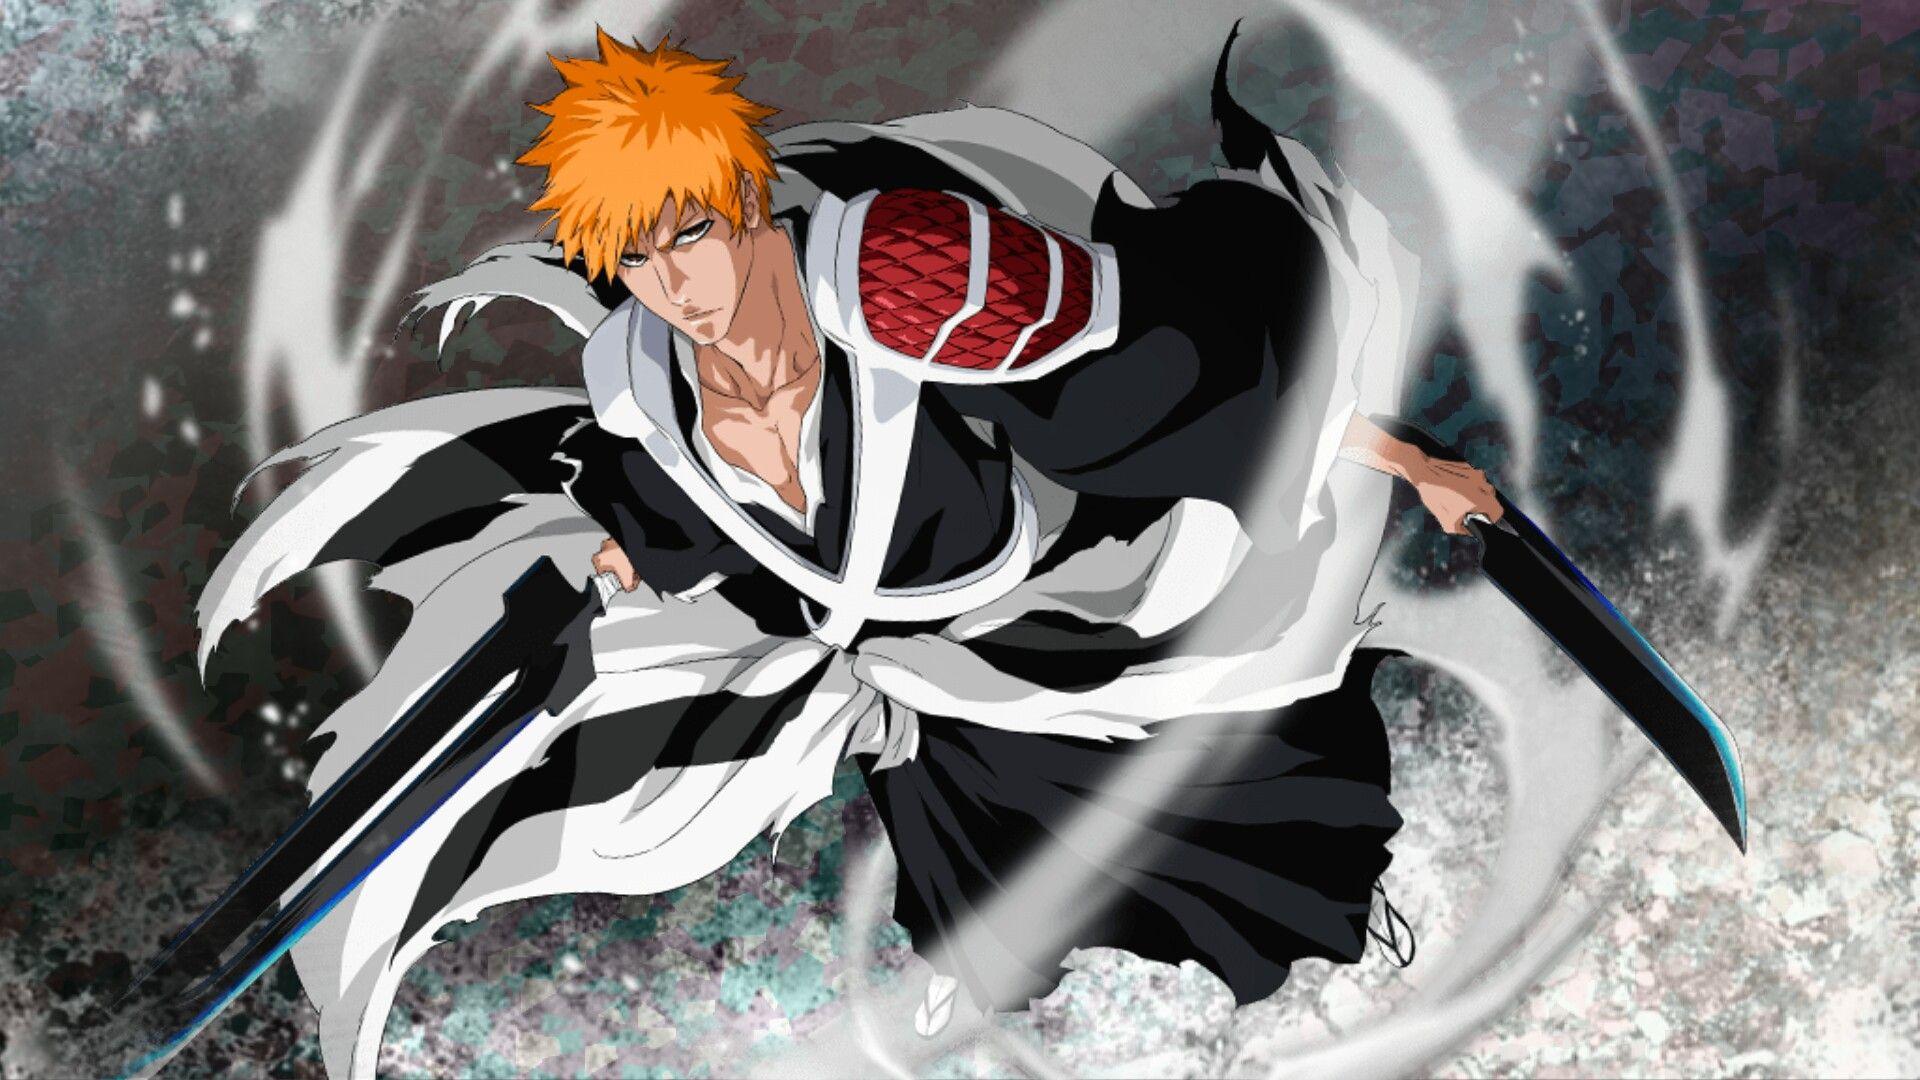 120+ Bleach: Thousand-Year Blood War HD Wallpapers and Backgrounds